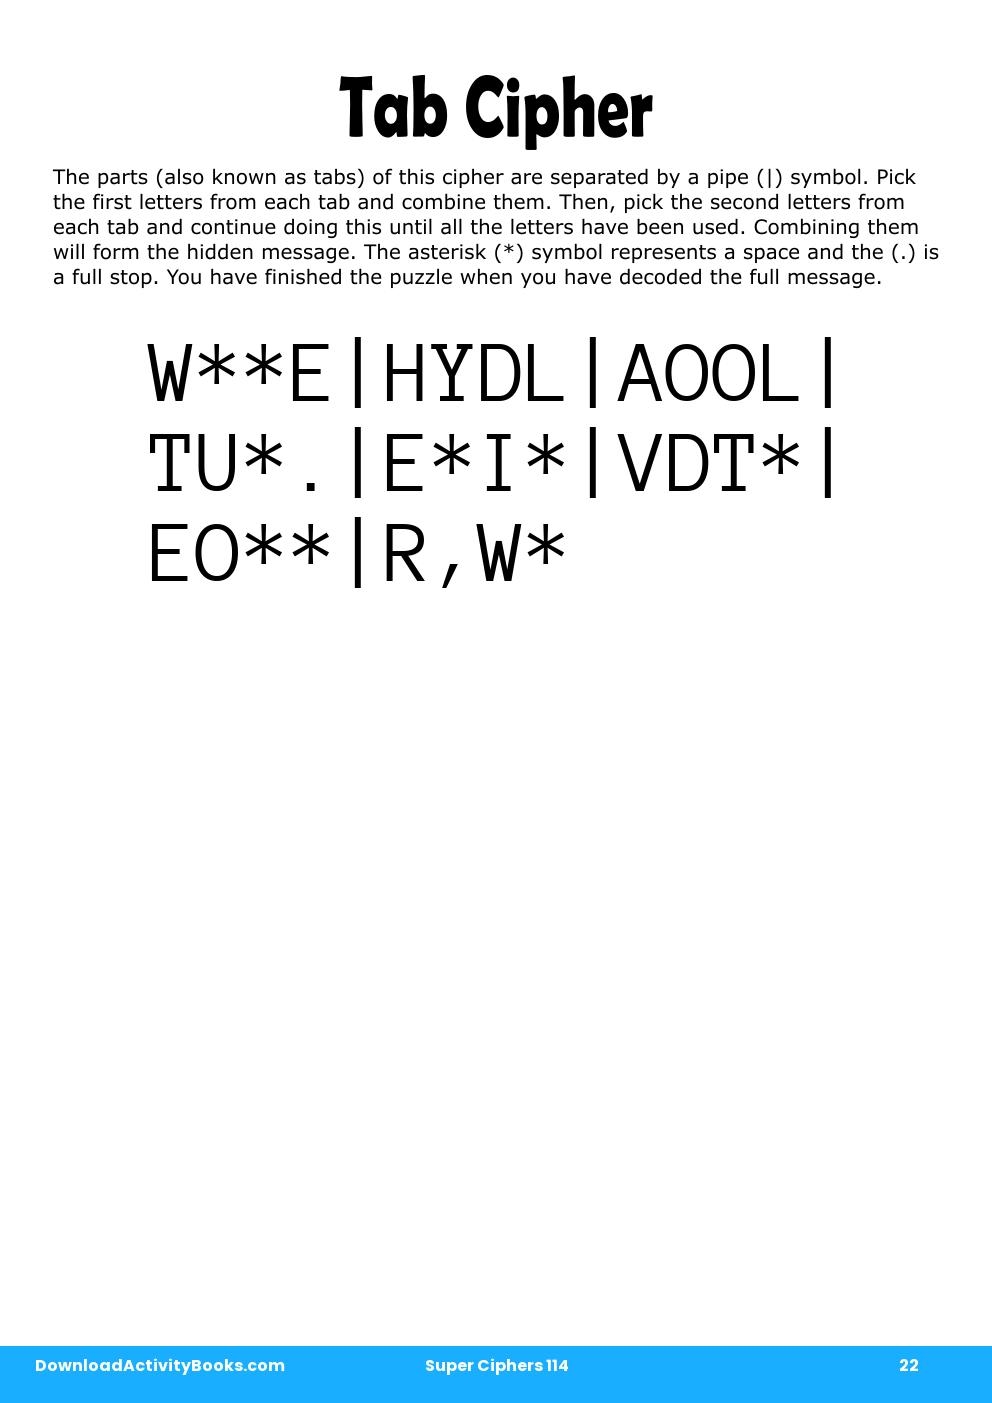 Tab Cipher in Super Ciphers 114